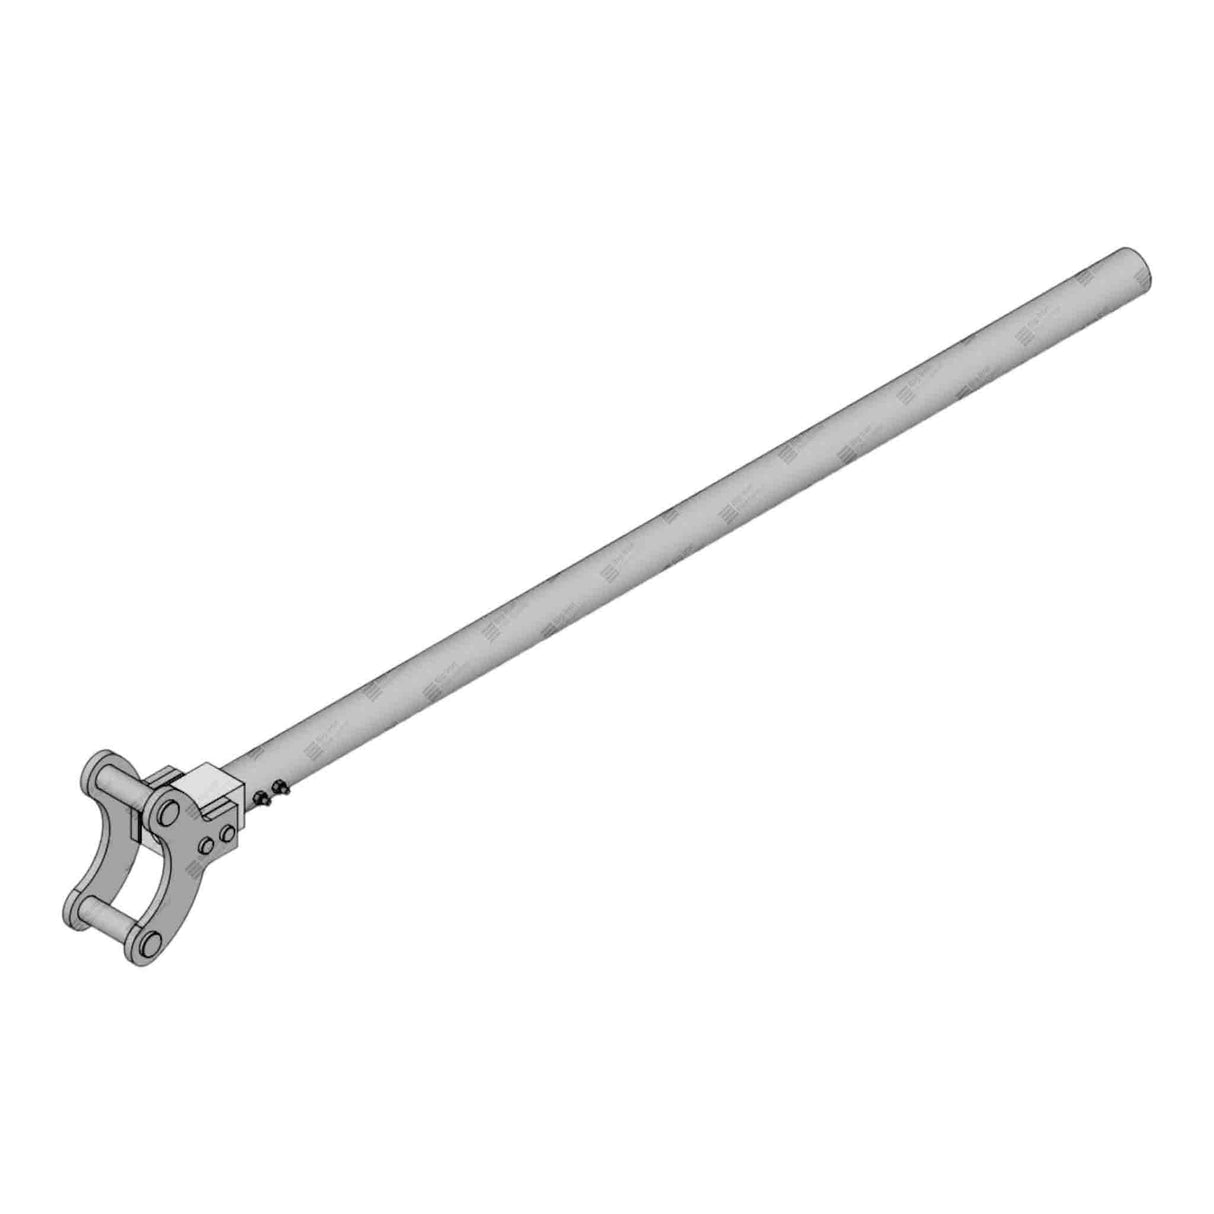 Wing Nut Wrench, 2" 1502, 4 FT